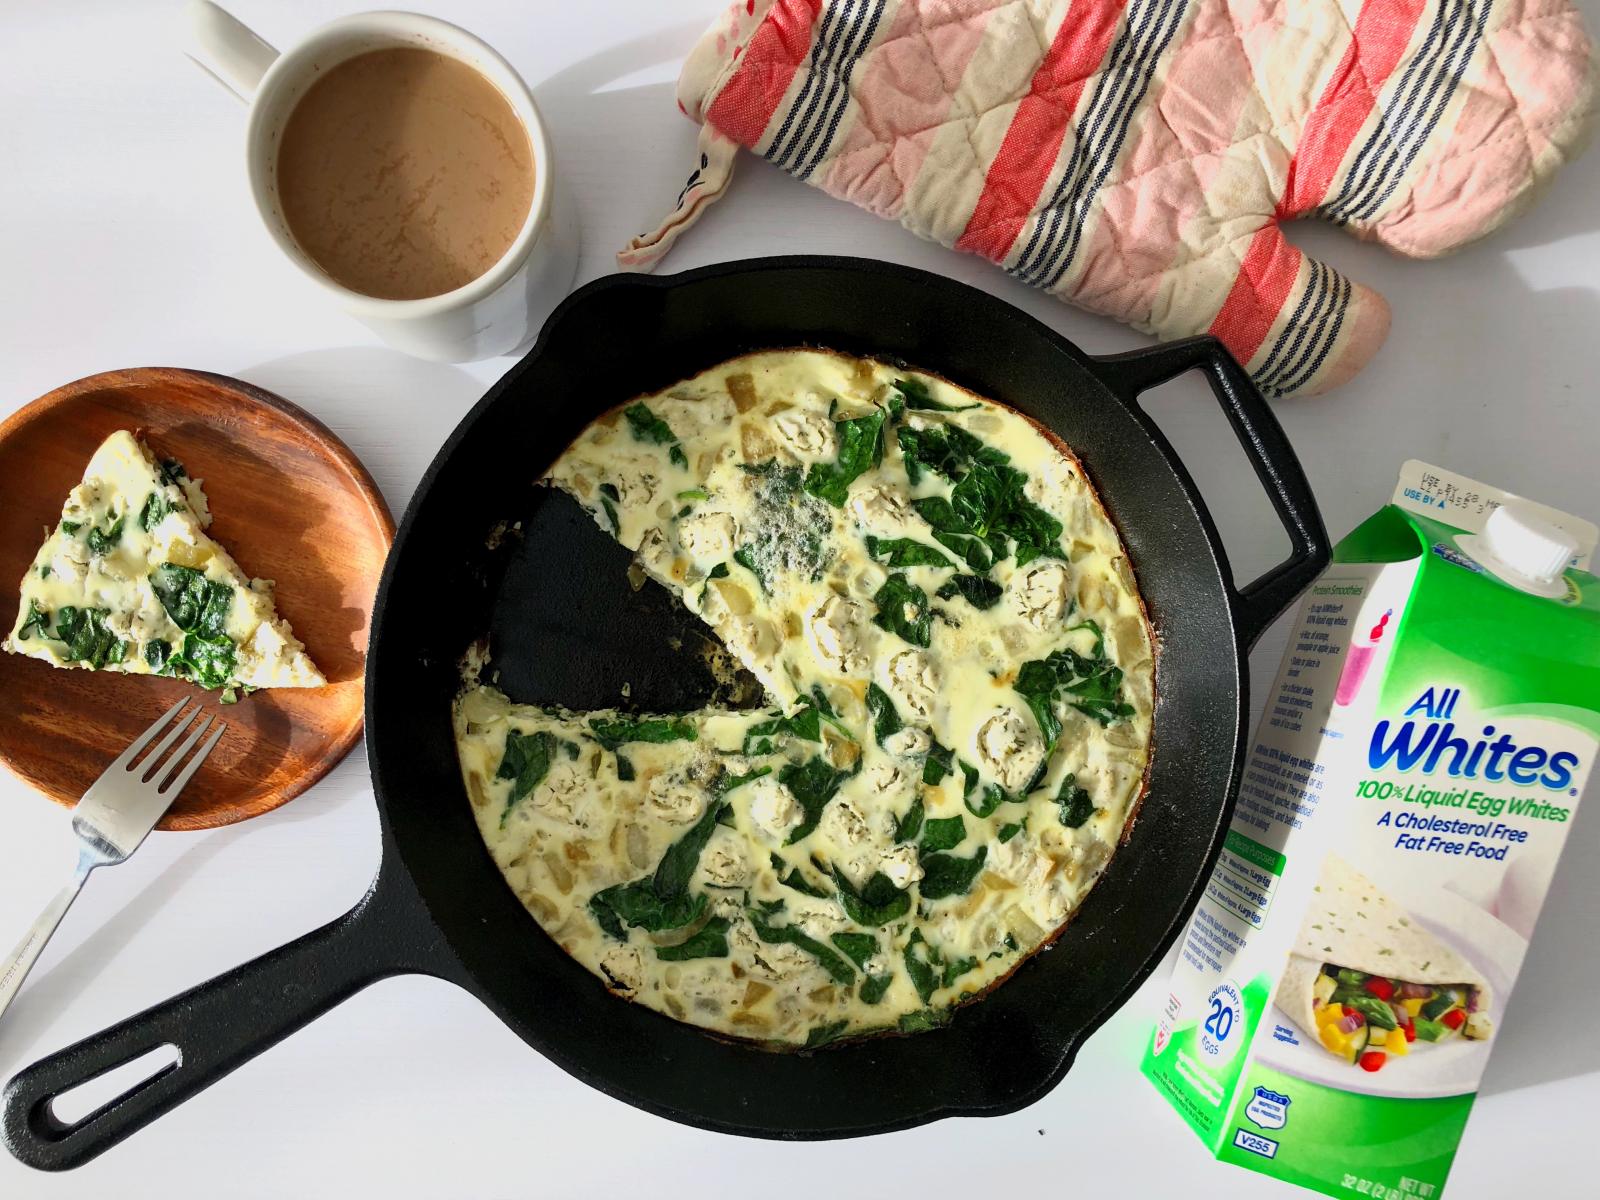 Spinach and Goat Cheese Egg White Frittata